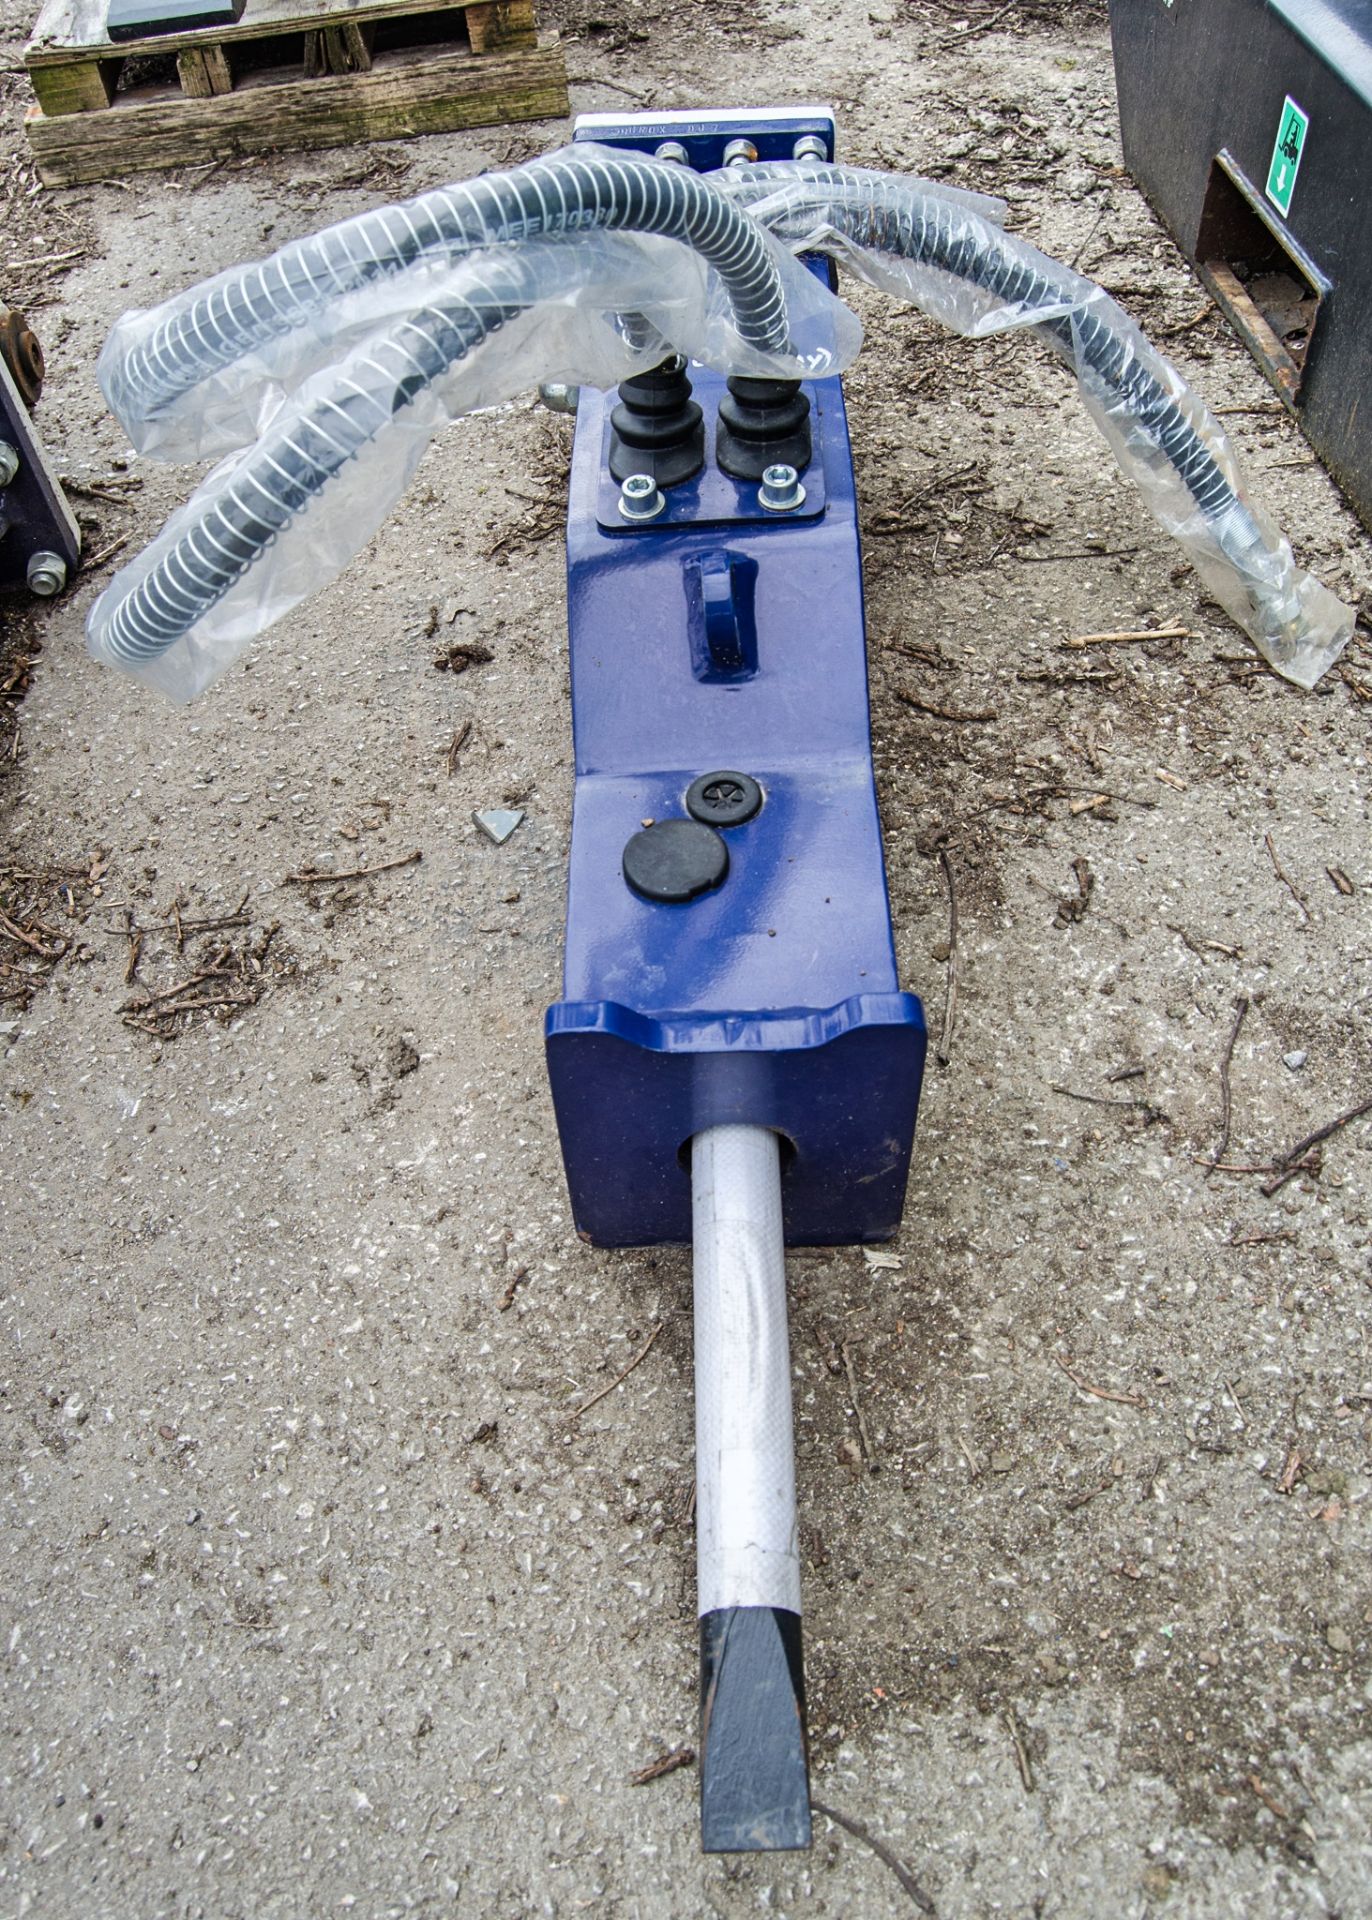 Hirox hydraulic breaker to suit micro excavator Pin diameter: 25mm Pin centres: 90mm Pin width: - Image 4 of 4